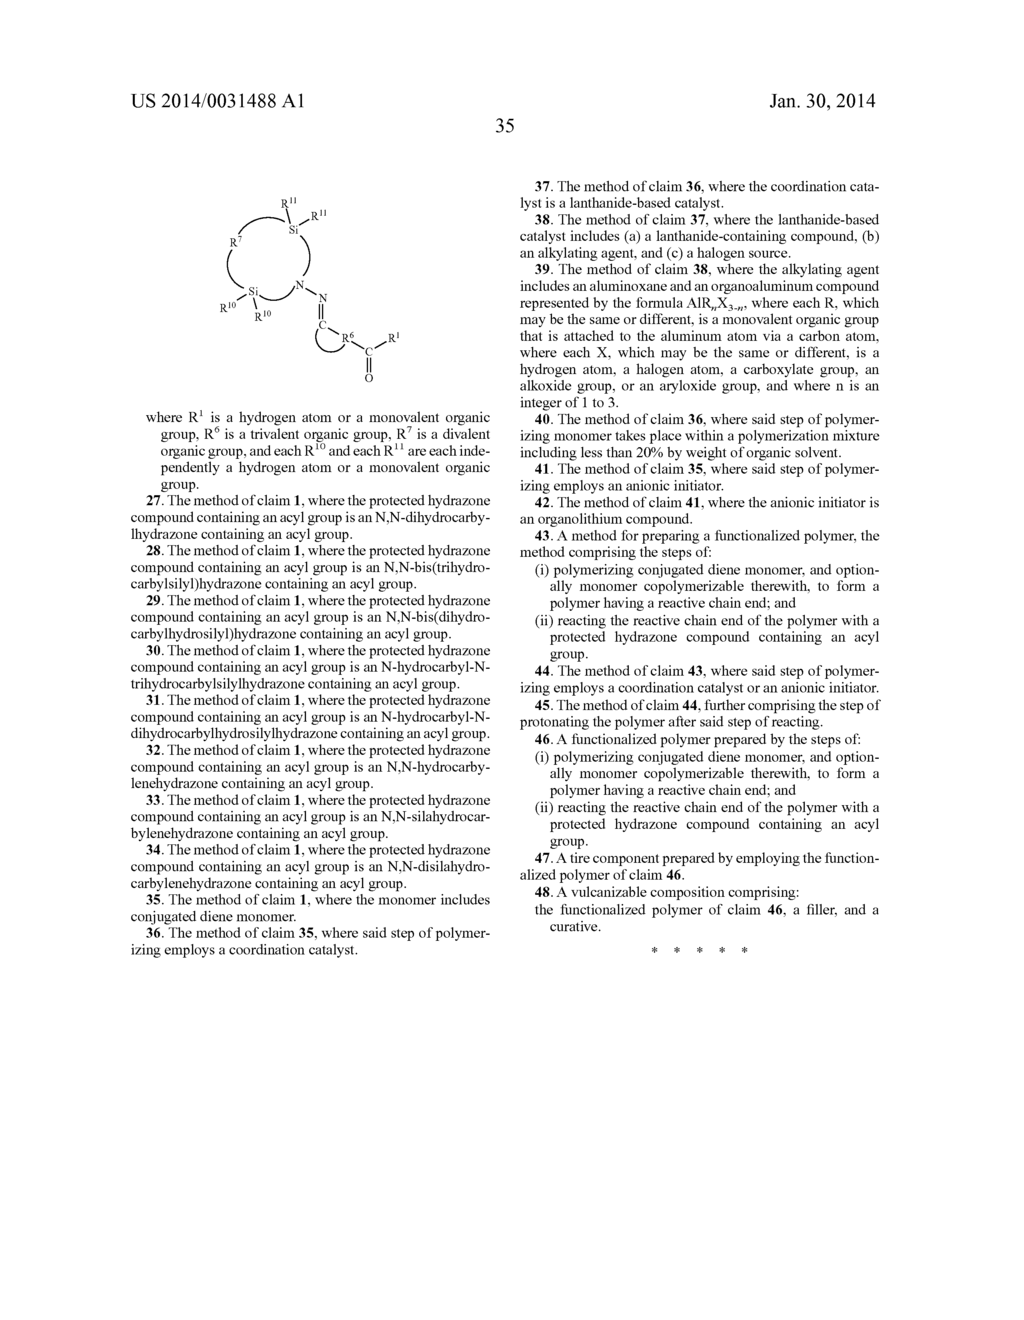 Polymers Functionalized With Protected Hydrazone Compounds Containing An     Acyl Group - diagram, schematic, and image 38